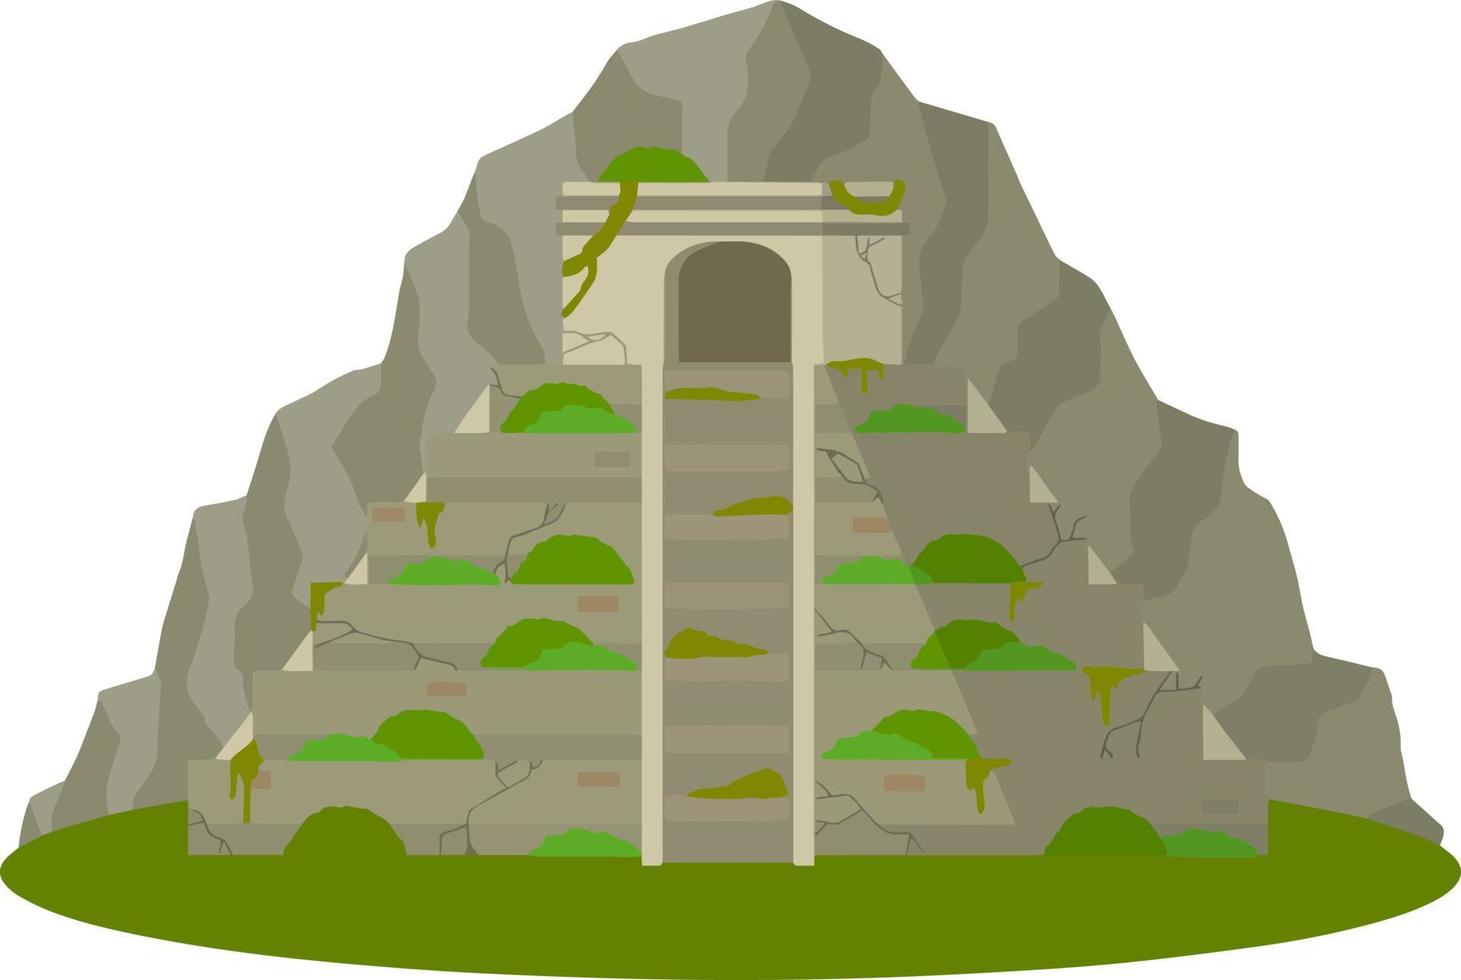 Mayan pyramid. Ancient American culture. Building in green jungle. Tourist attraction of Mexico. Stepped abandoned temple. An old mysterious civilization. Cartoon flat illustration vector